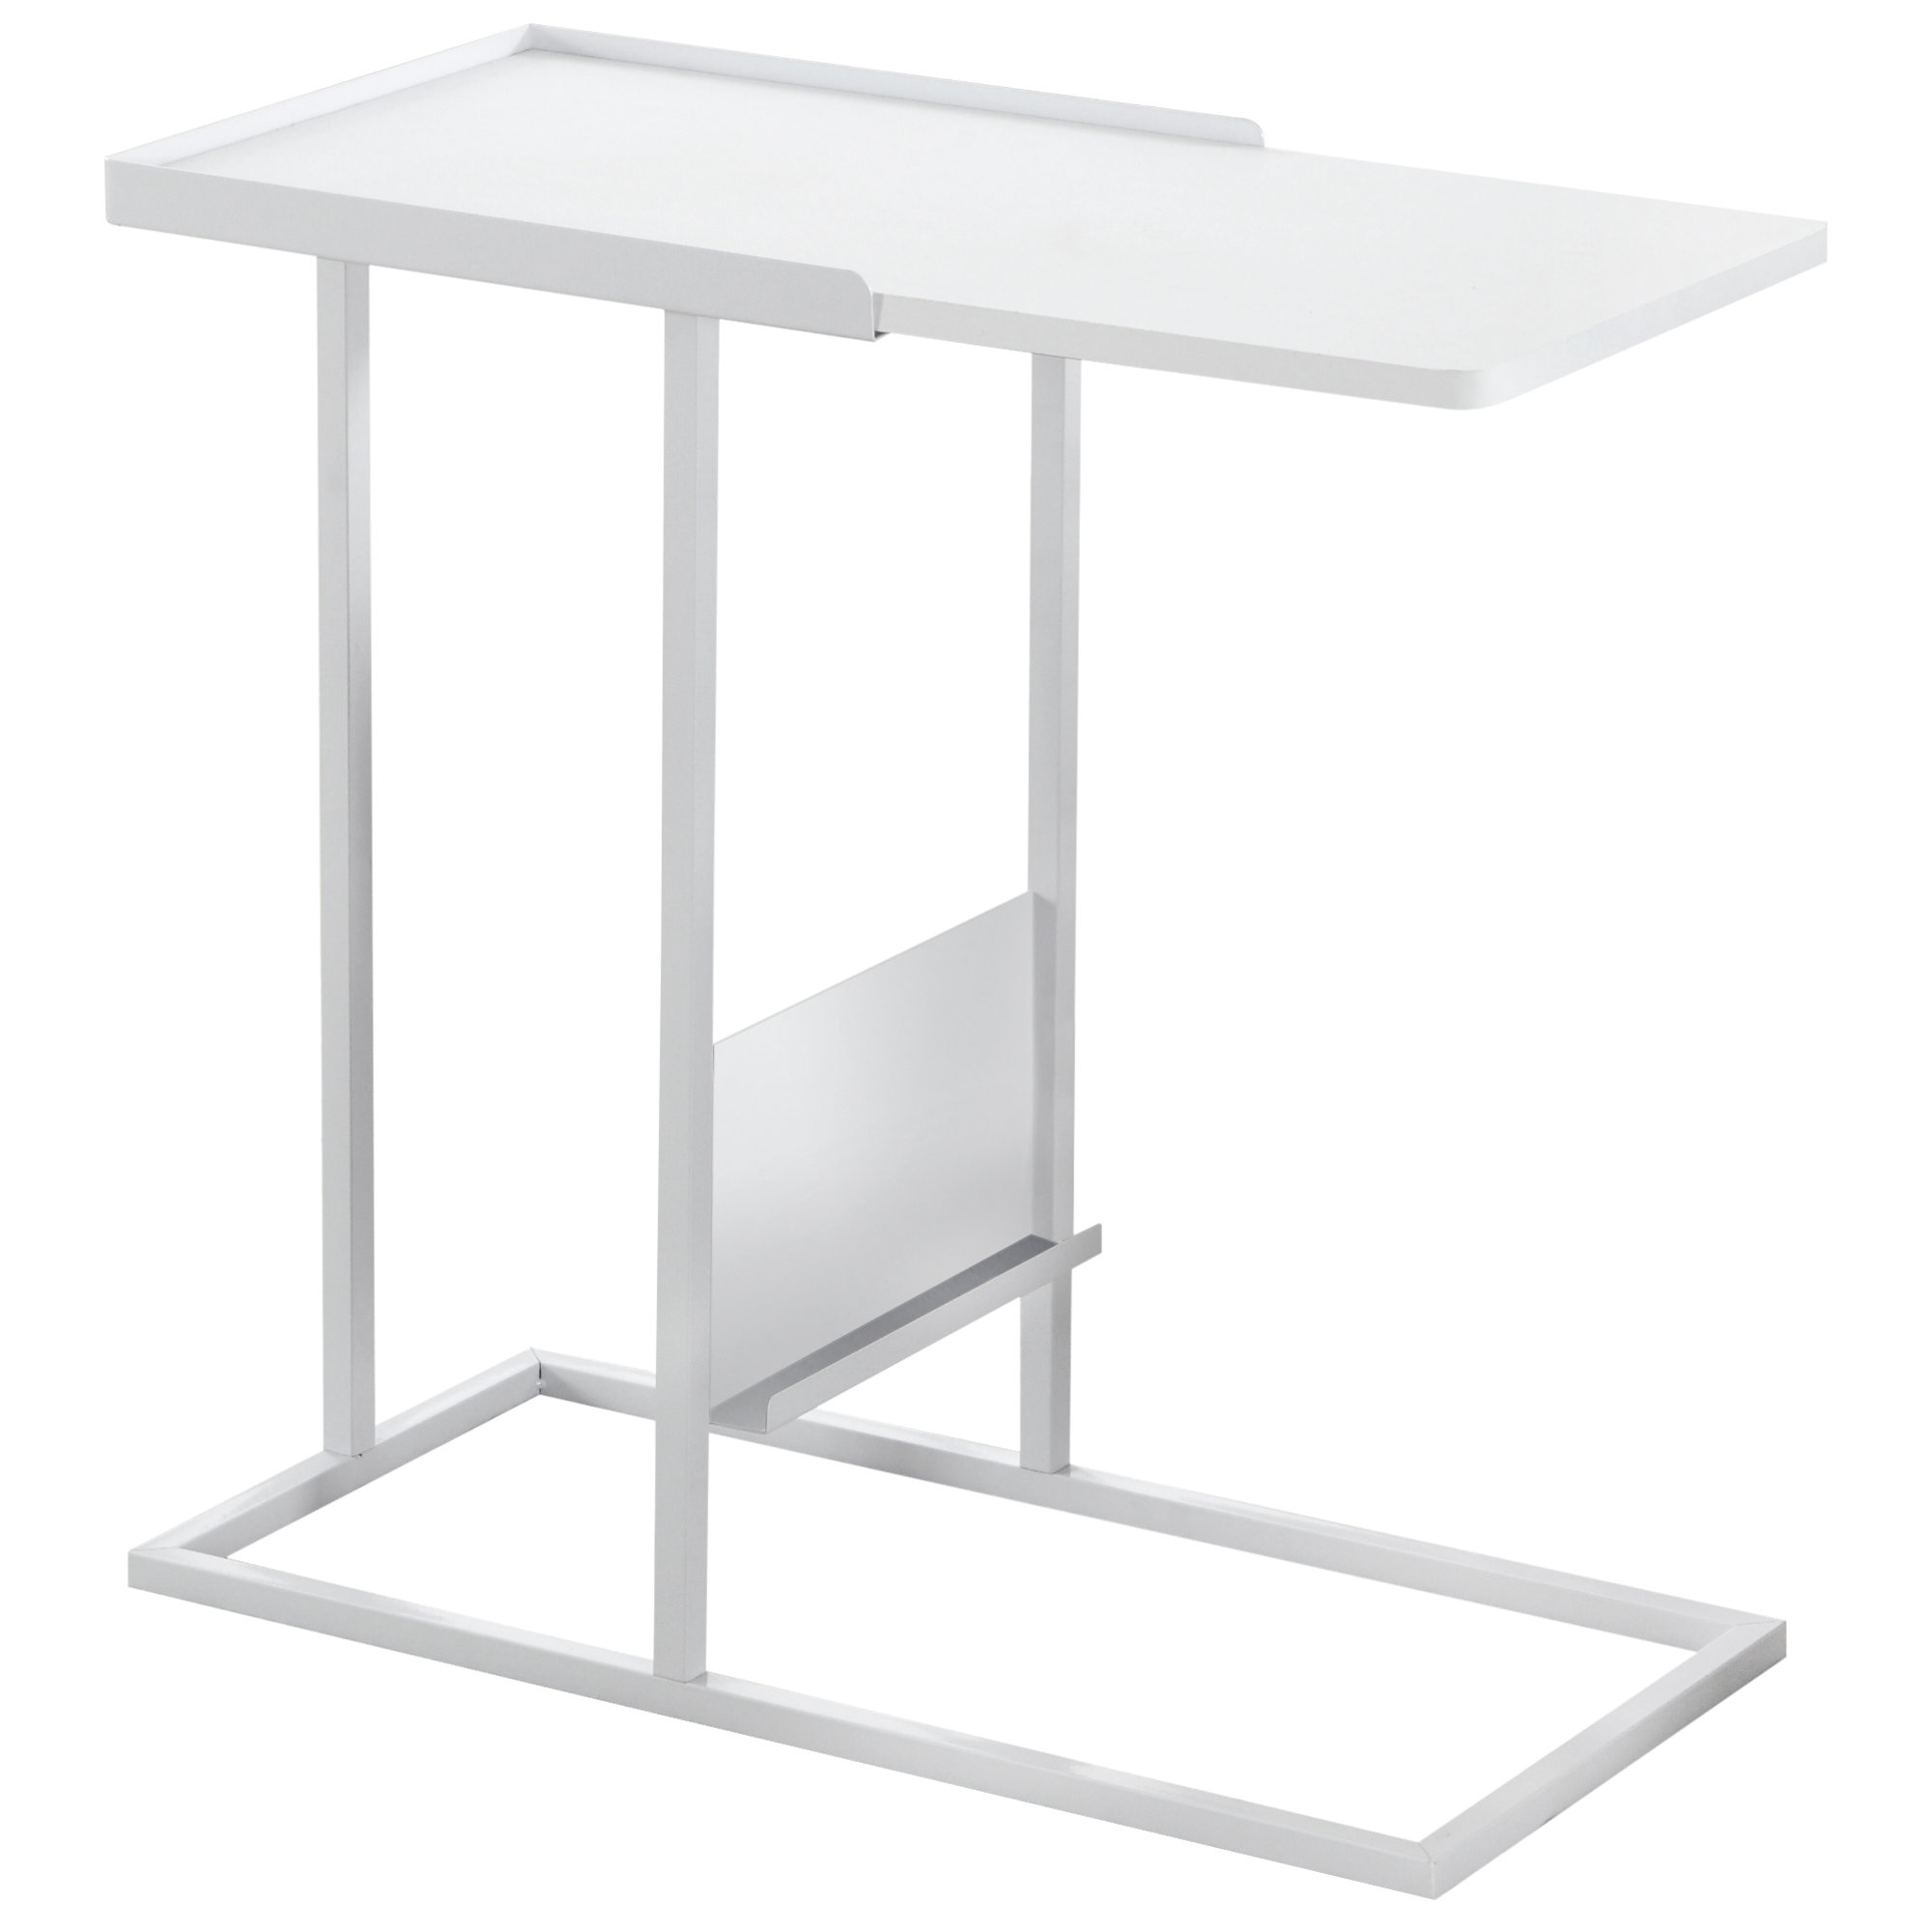 23.75" x 12" x 23.75" White Metal Mdf Accent Table with Magazine Rack